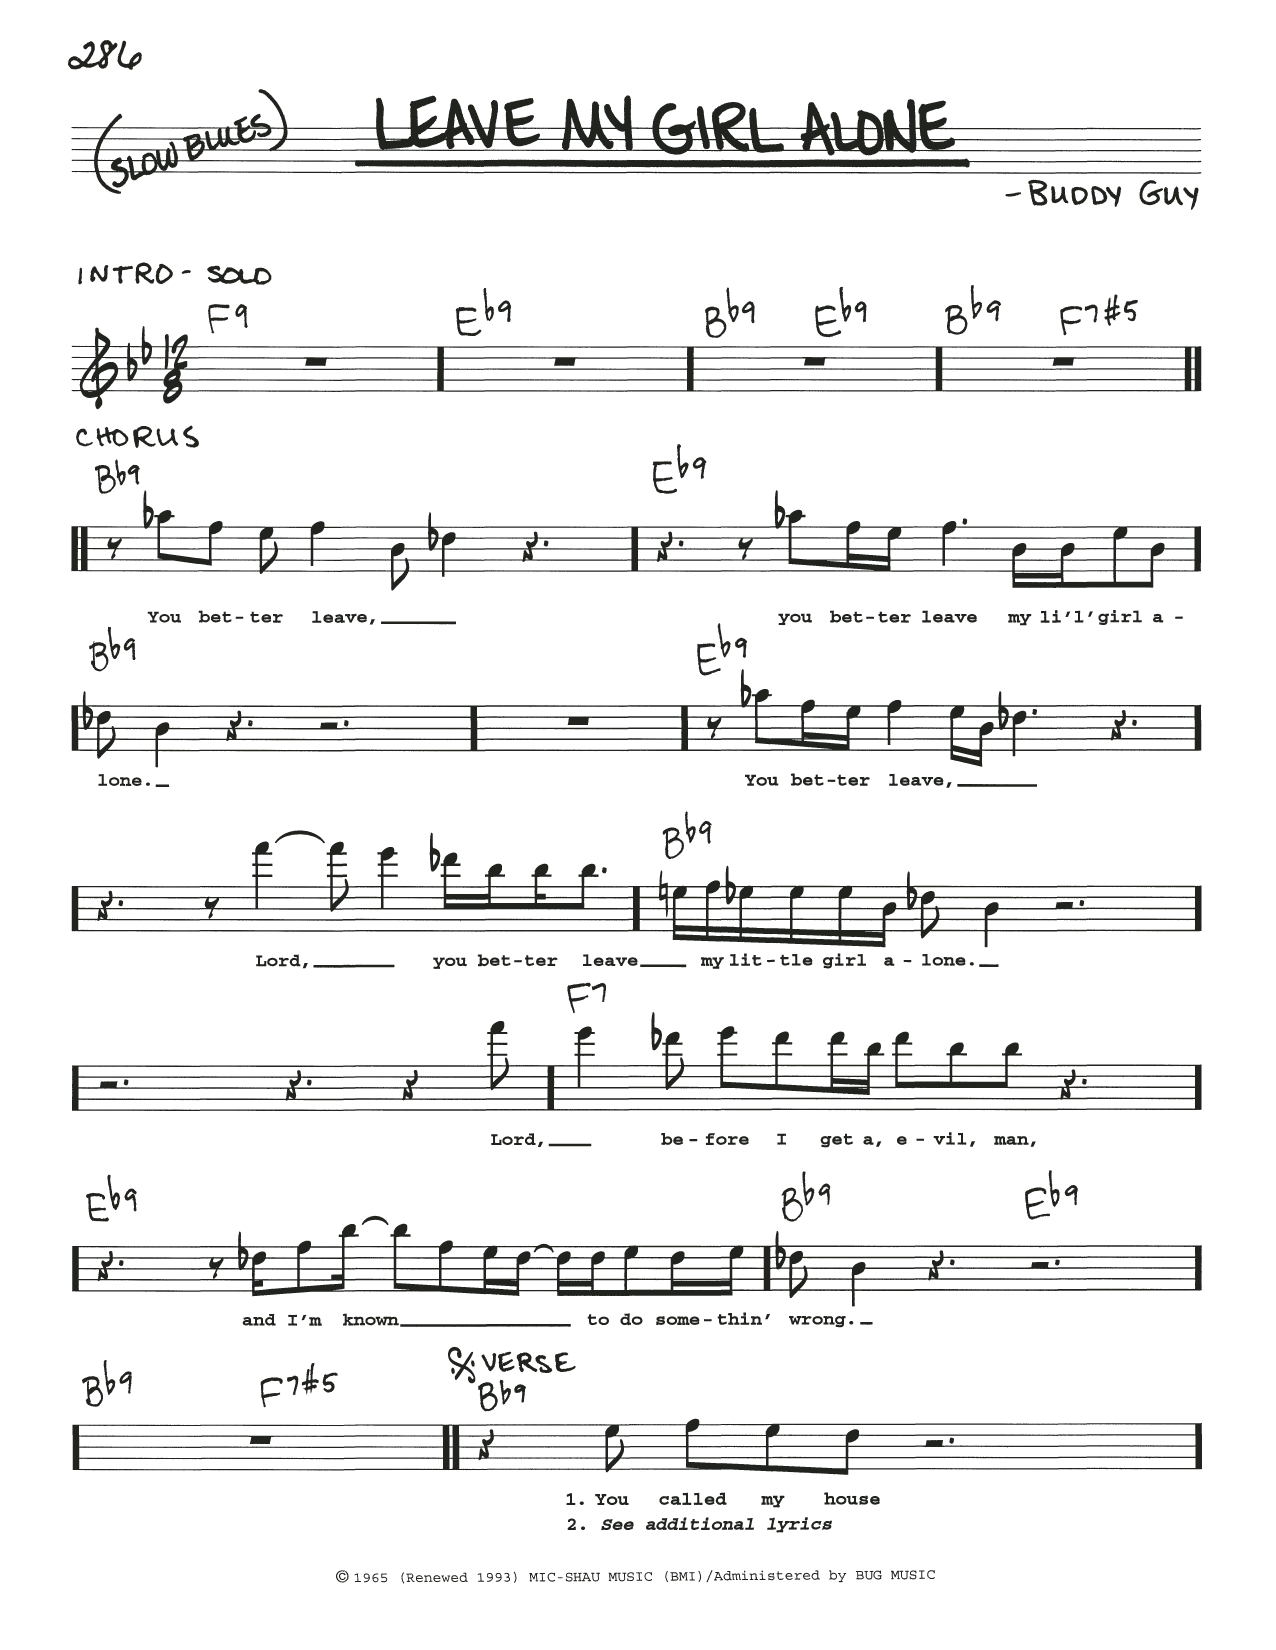 Download Buddy Guy Leave My Girl Alone Sheet Music